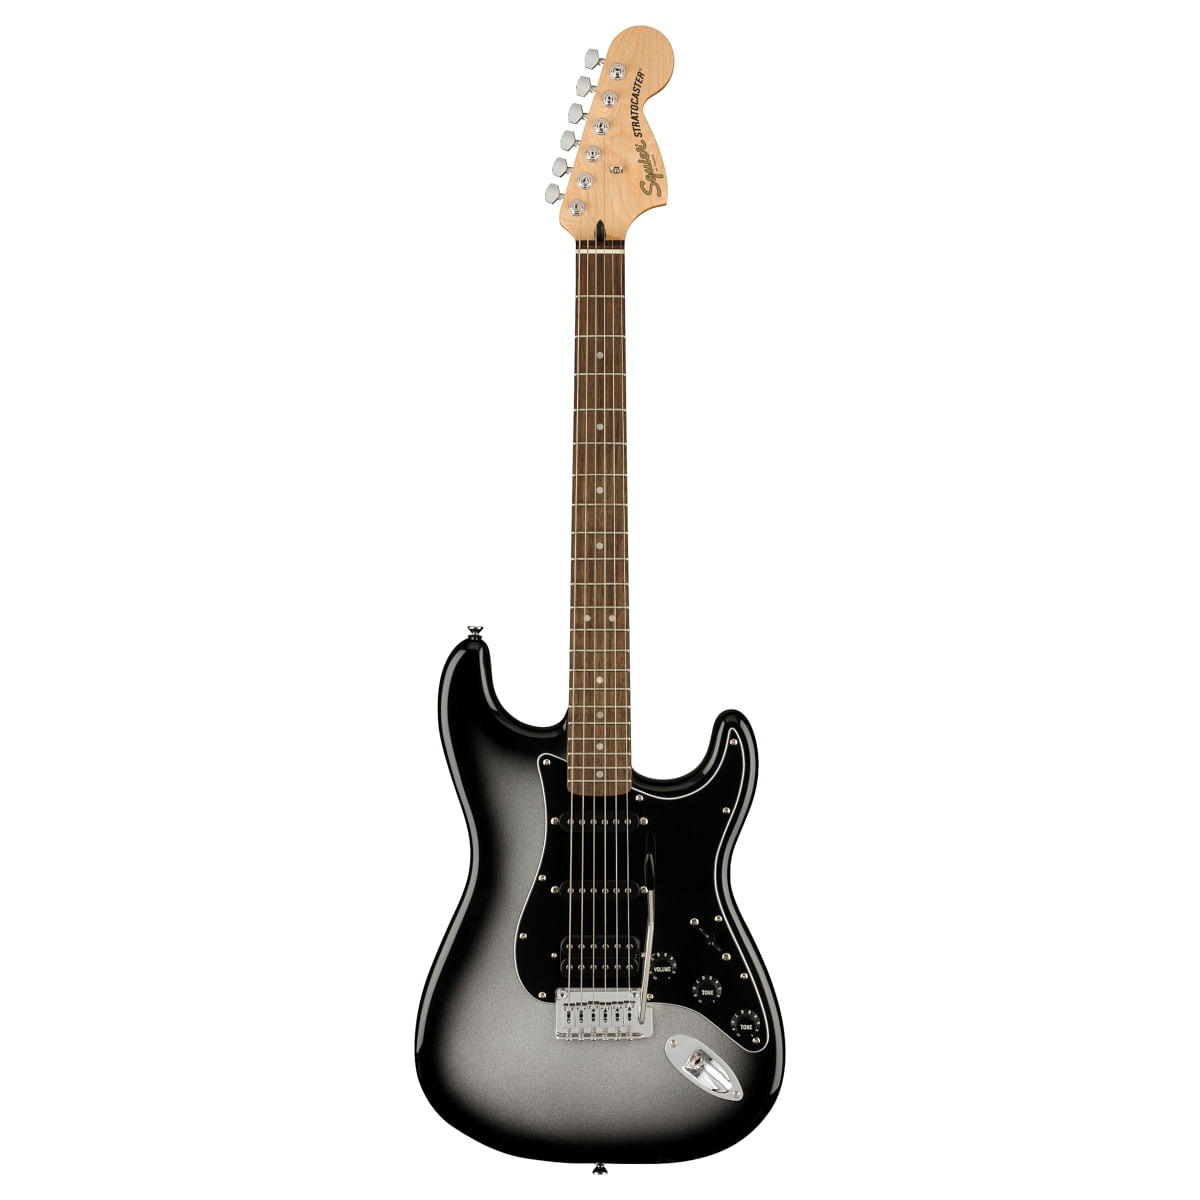 Buy Fender, Electric Guitar, Squier Affinity Series Stratocaster ...